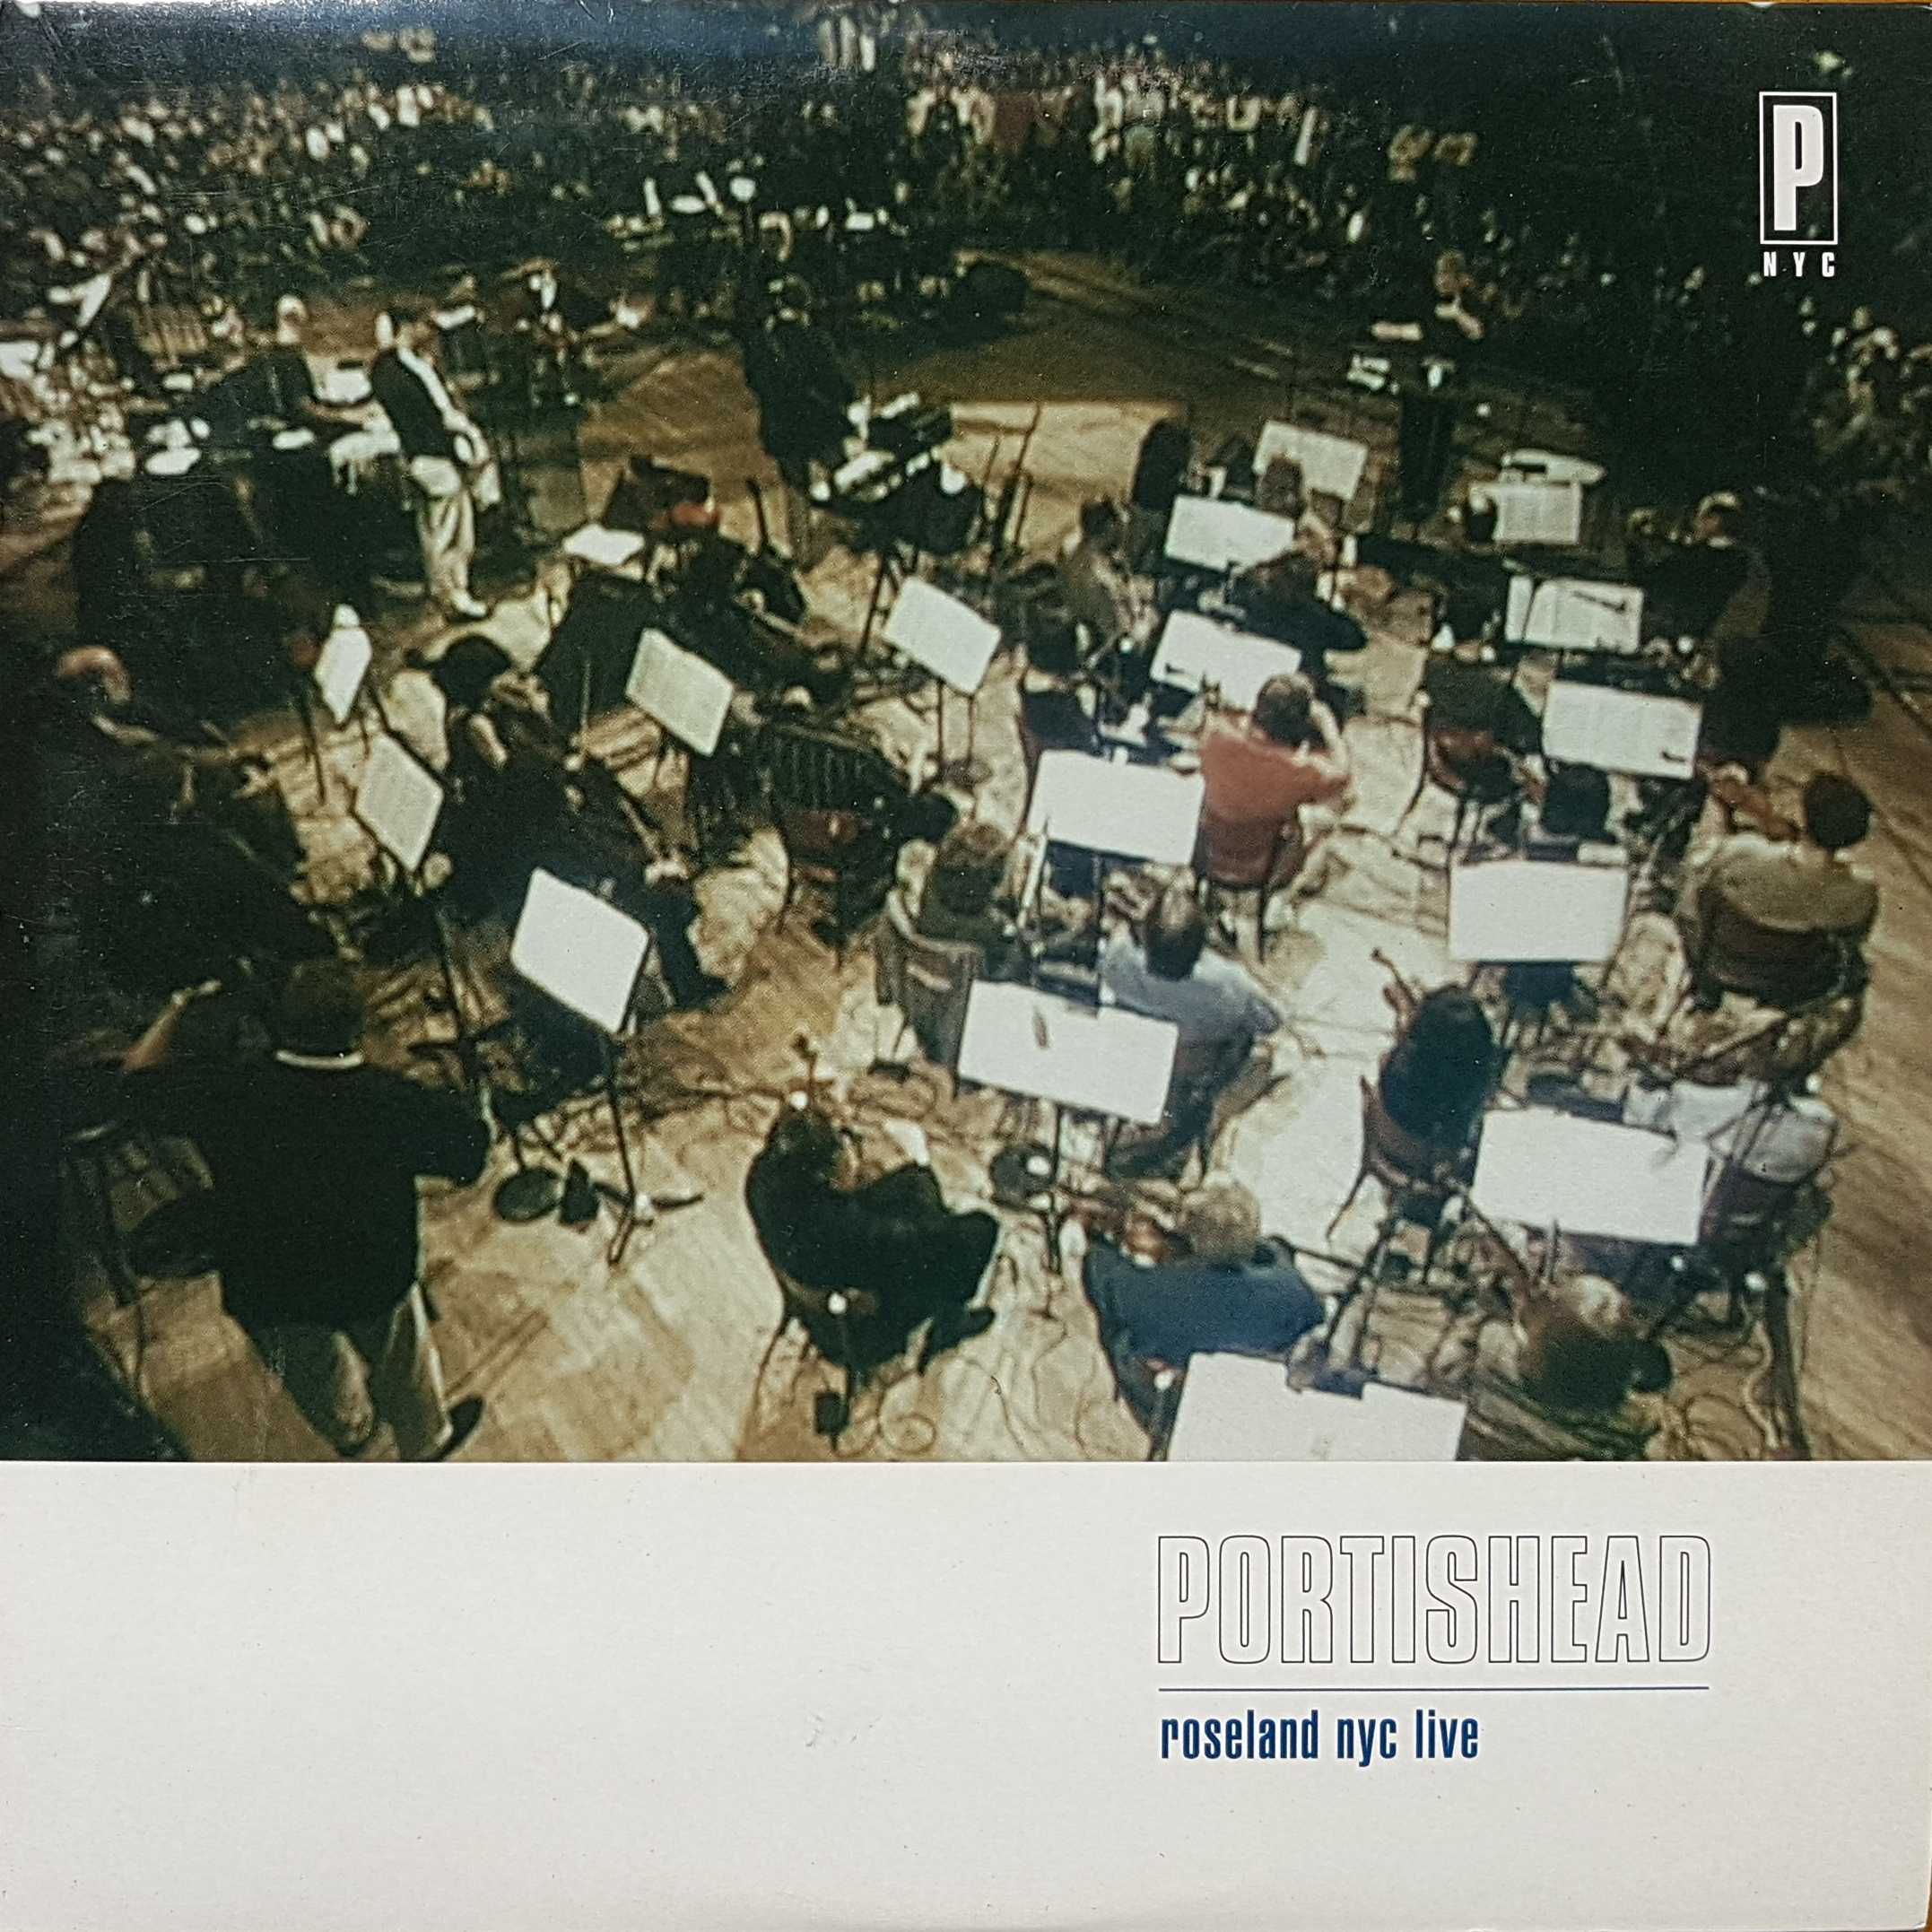 Picture of Roseland NYC - Live by artist Portishead  